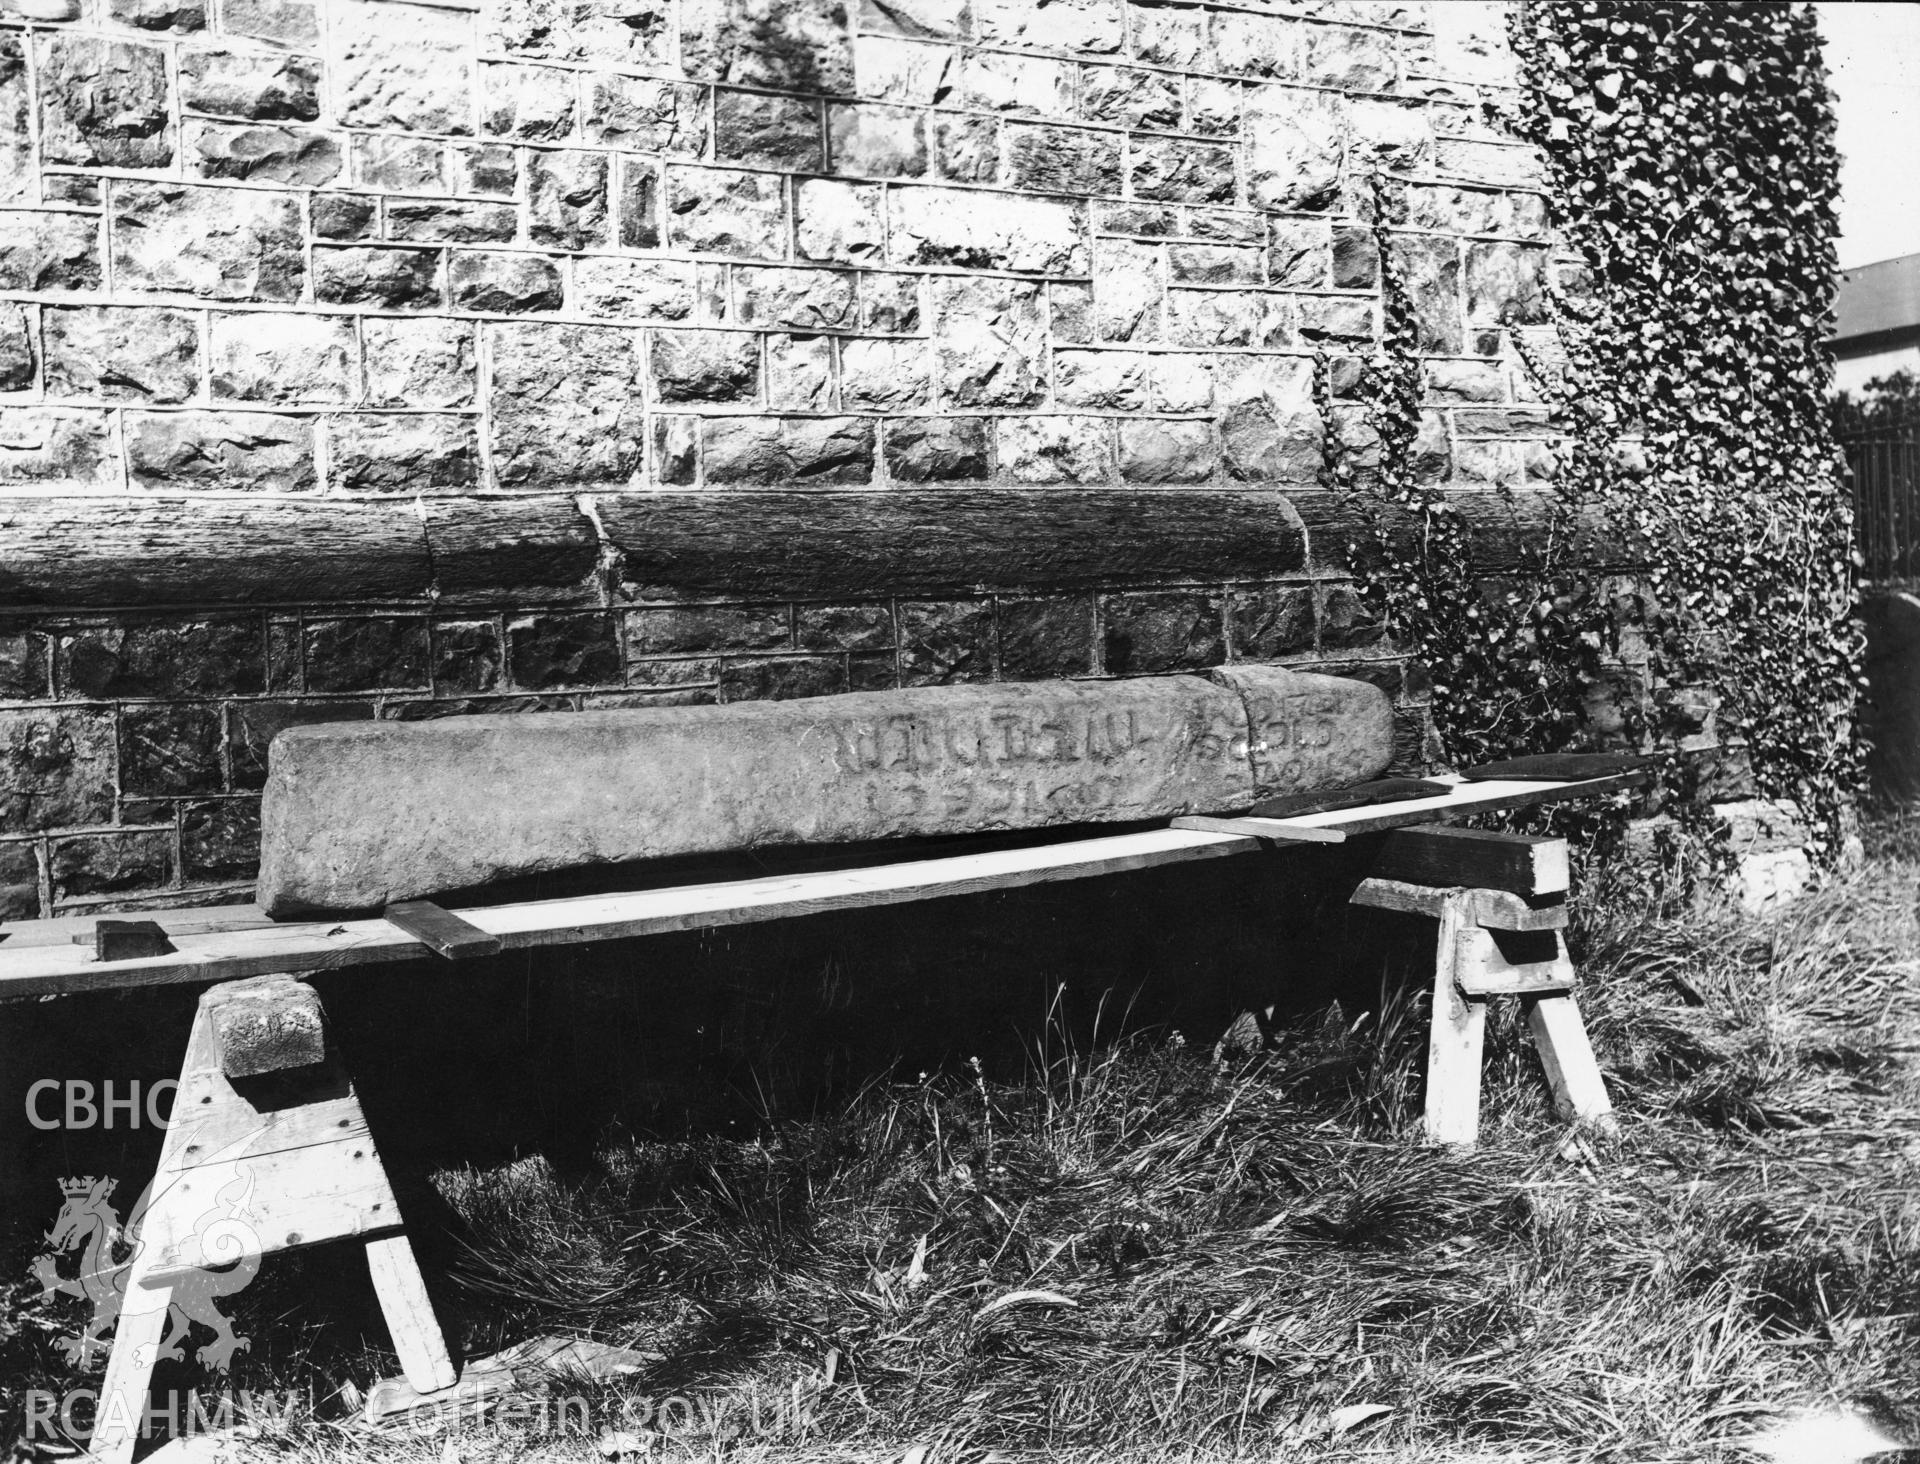 Black and white photographic print of inscribed stone at ST Cadfan's, Towyn, from a collection produced or collected by former RCAHMW investigator W.E. Griffiths. Undated, photographer unknown.